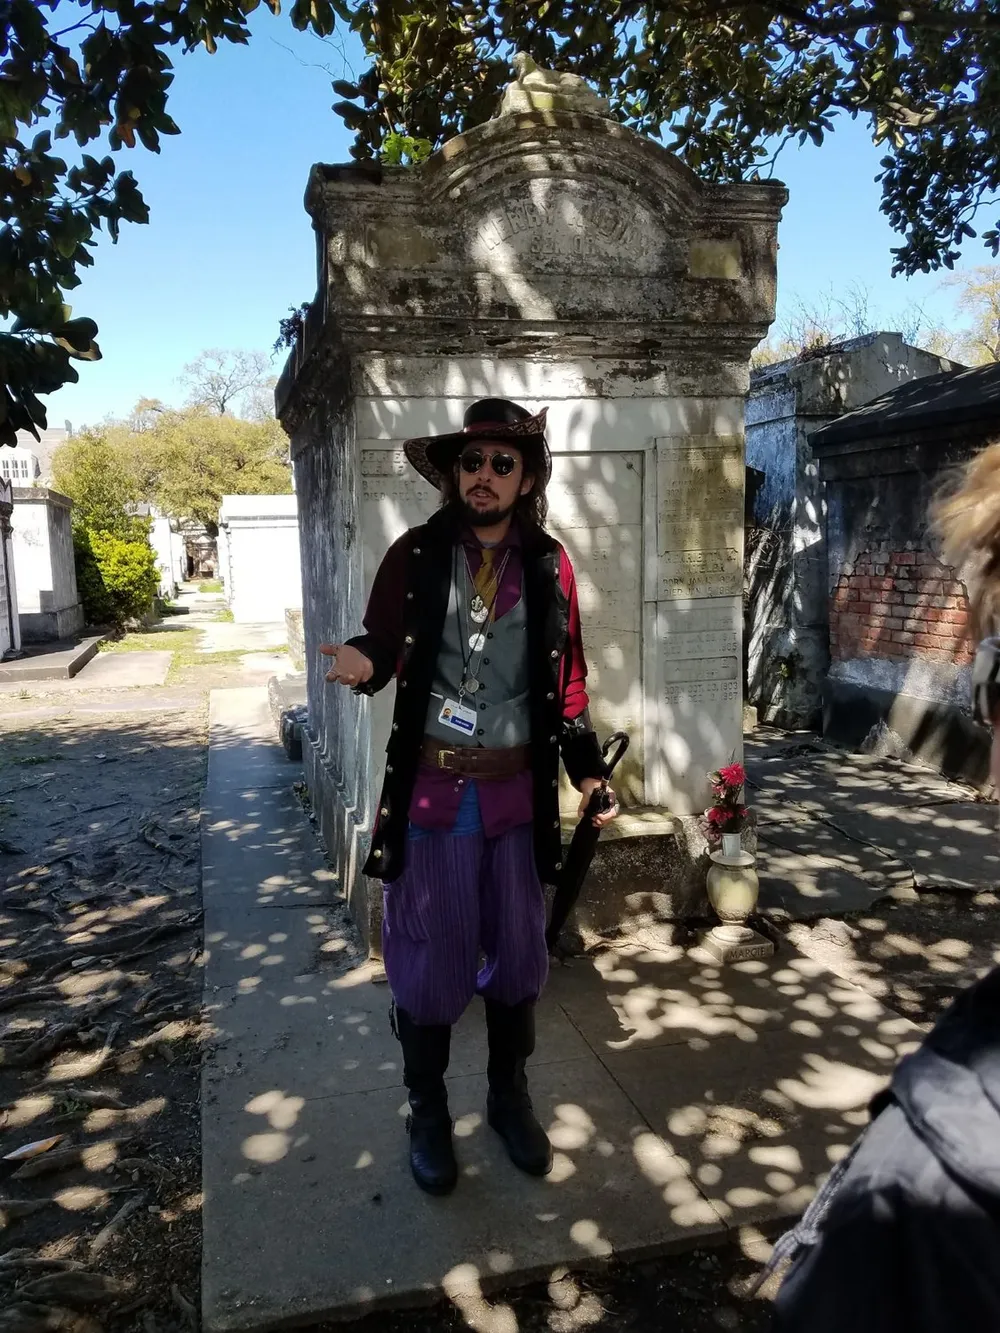 A person dressed in historically-inspired attire stands before an old tombstone in what appears to be a historical or ghost tour